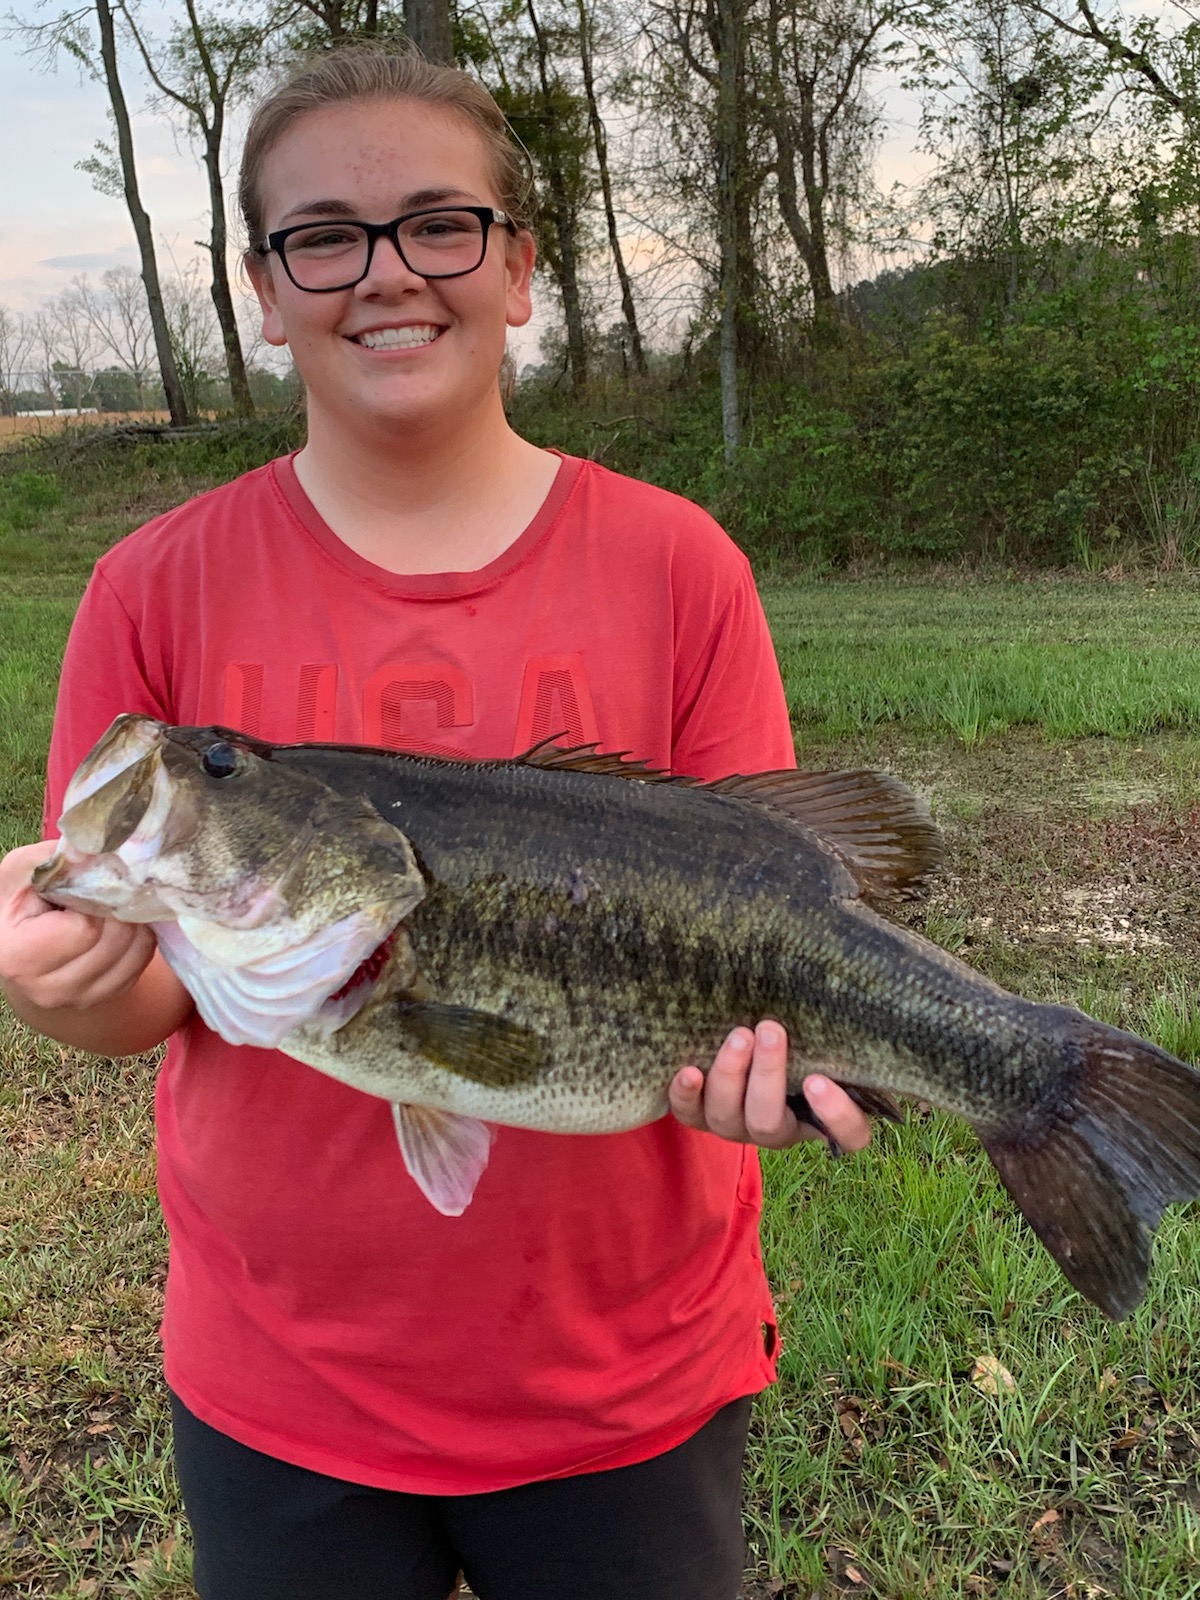 NEW Fishing Gear Helped Me Catch My BIGGEST Bass EVER! (PB